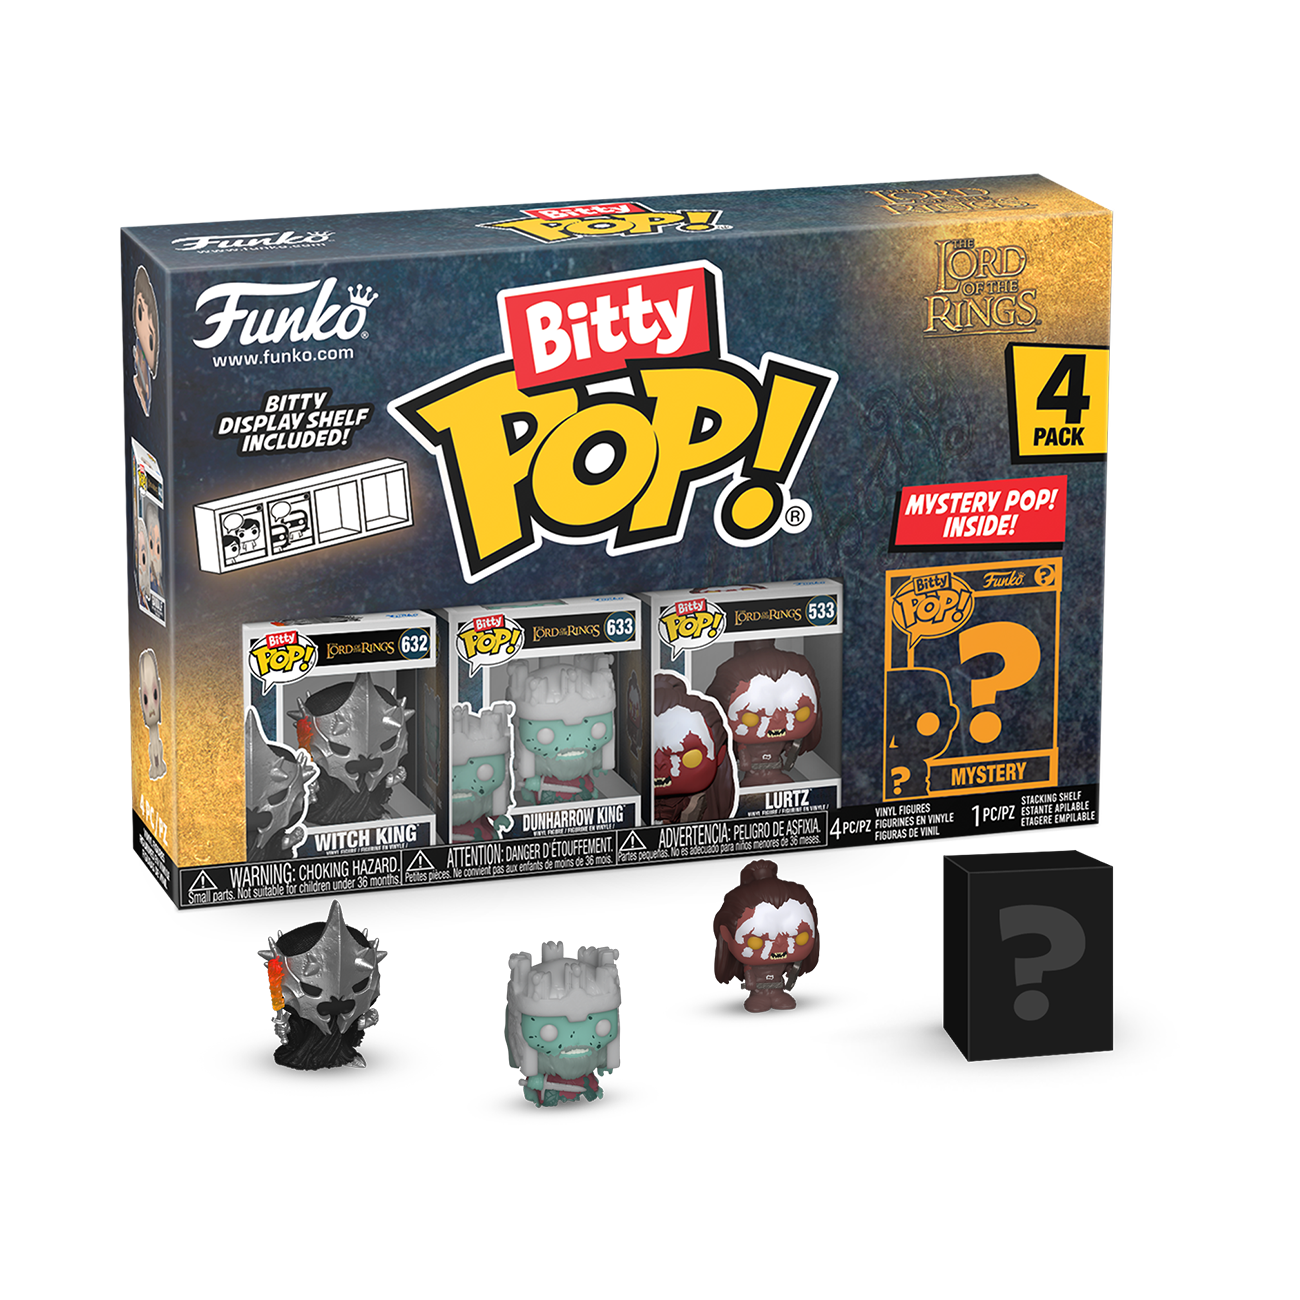 Funko Bitty POP! Lord of the Rings Vinyl Figure Set 4-Pack (Witch King, Dunharrow King, Lurtz, Mystery Pop!)